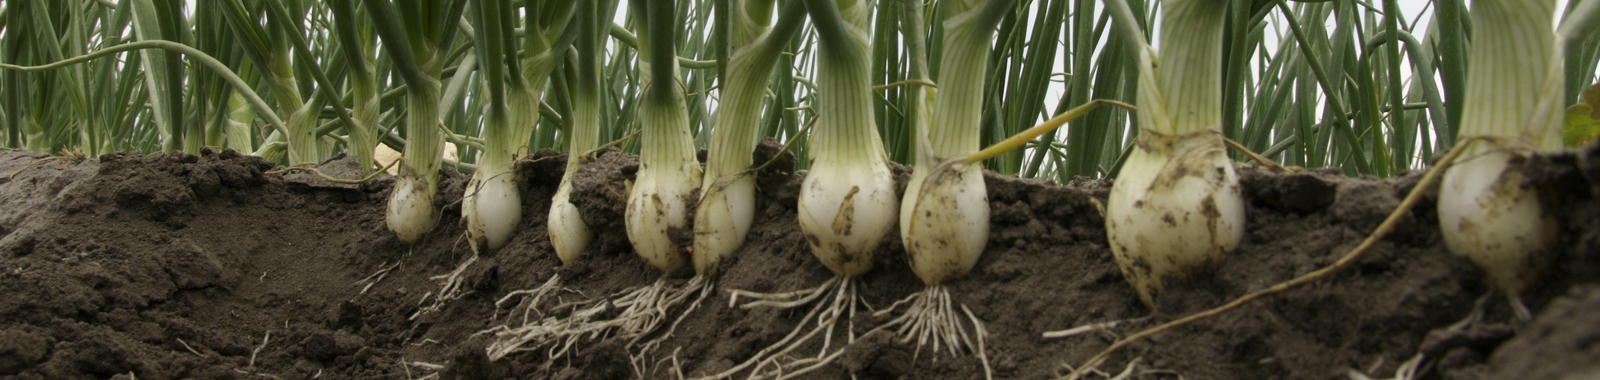 Improving onion skin appearance and condition